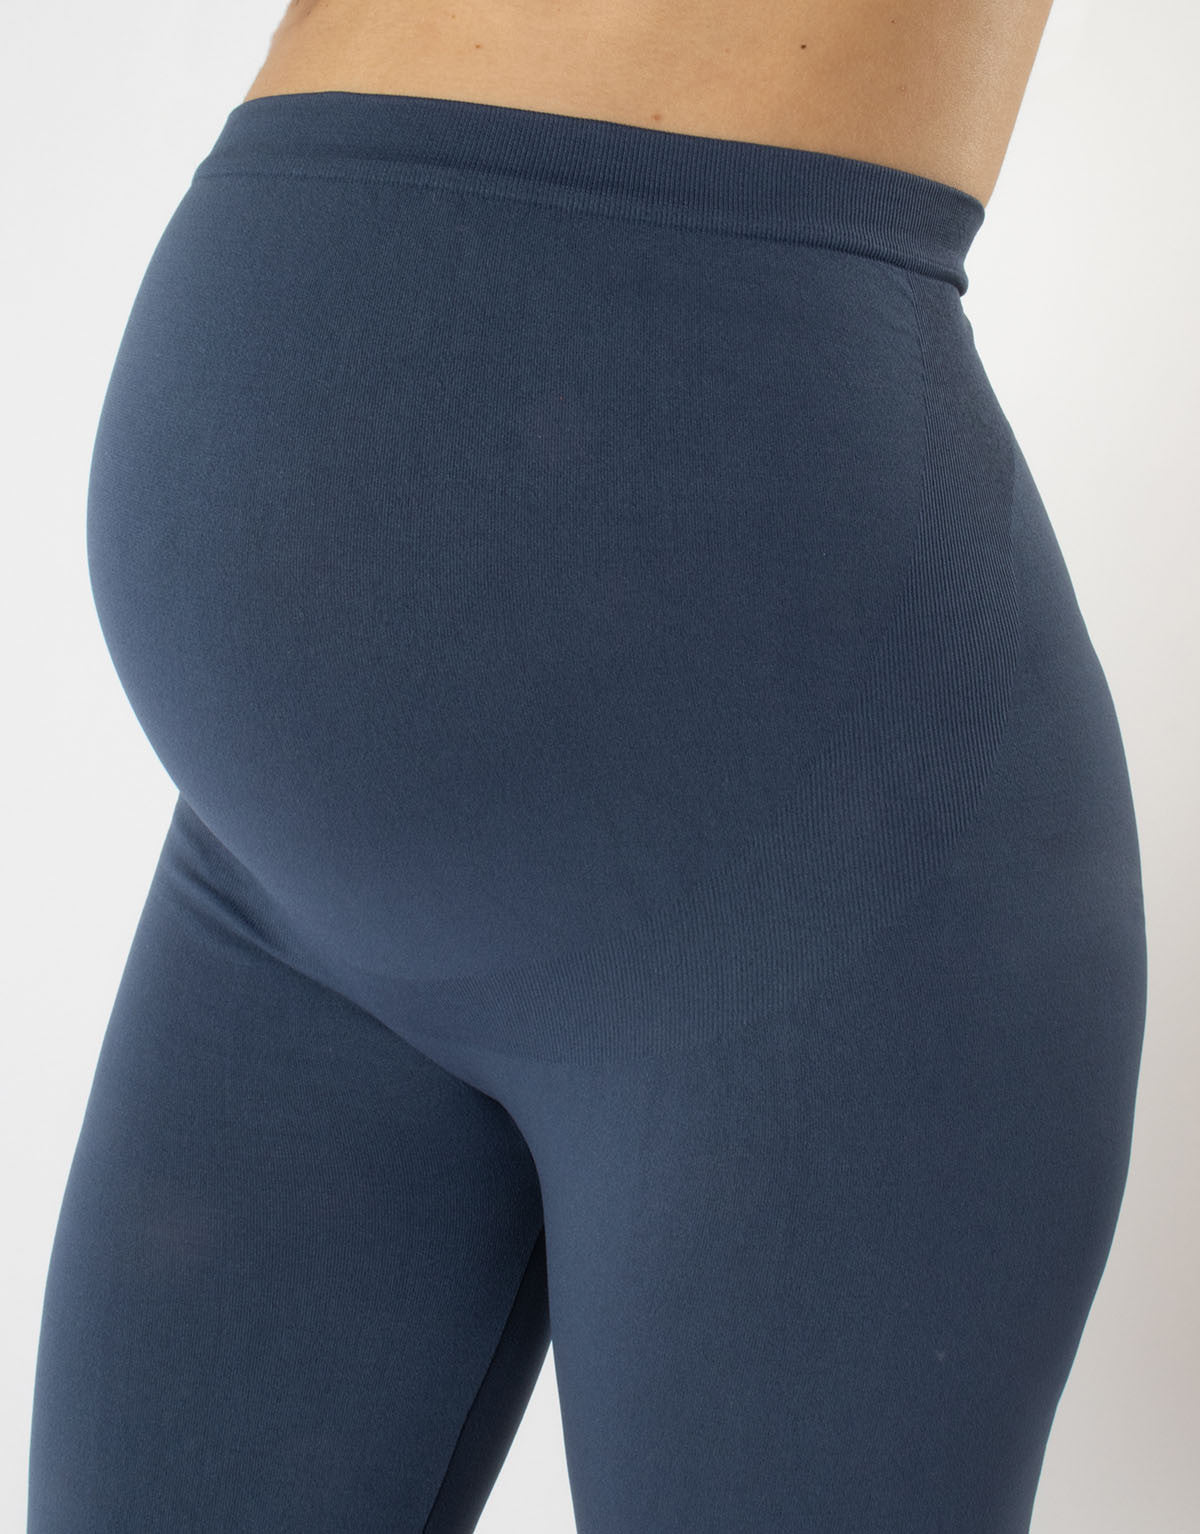 Calzitaly Maternity Leggings - Soft and plain denim blue pregnancy leggings with a high waisted structured brief top for a comfortable fit throughout pregnancy.